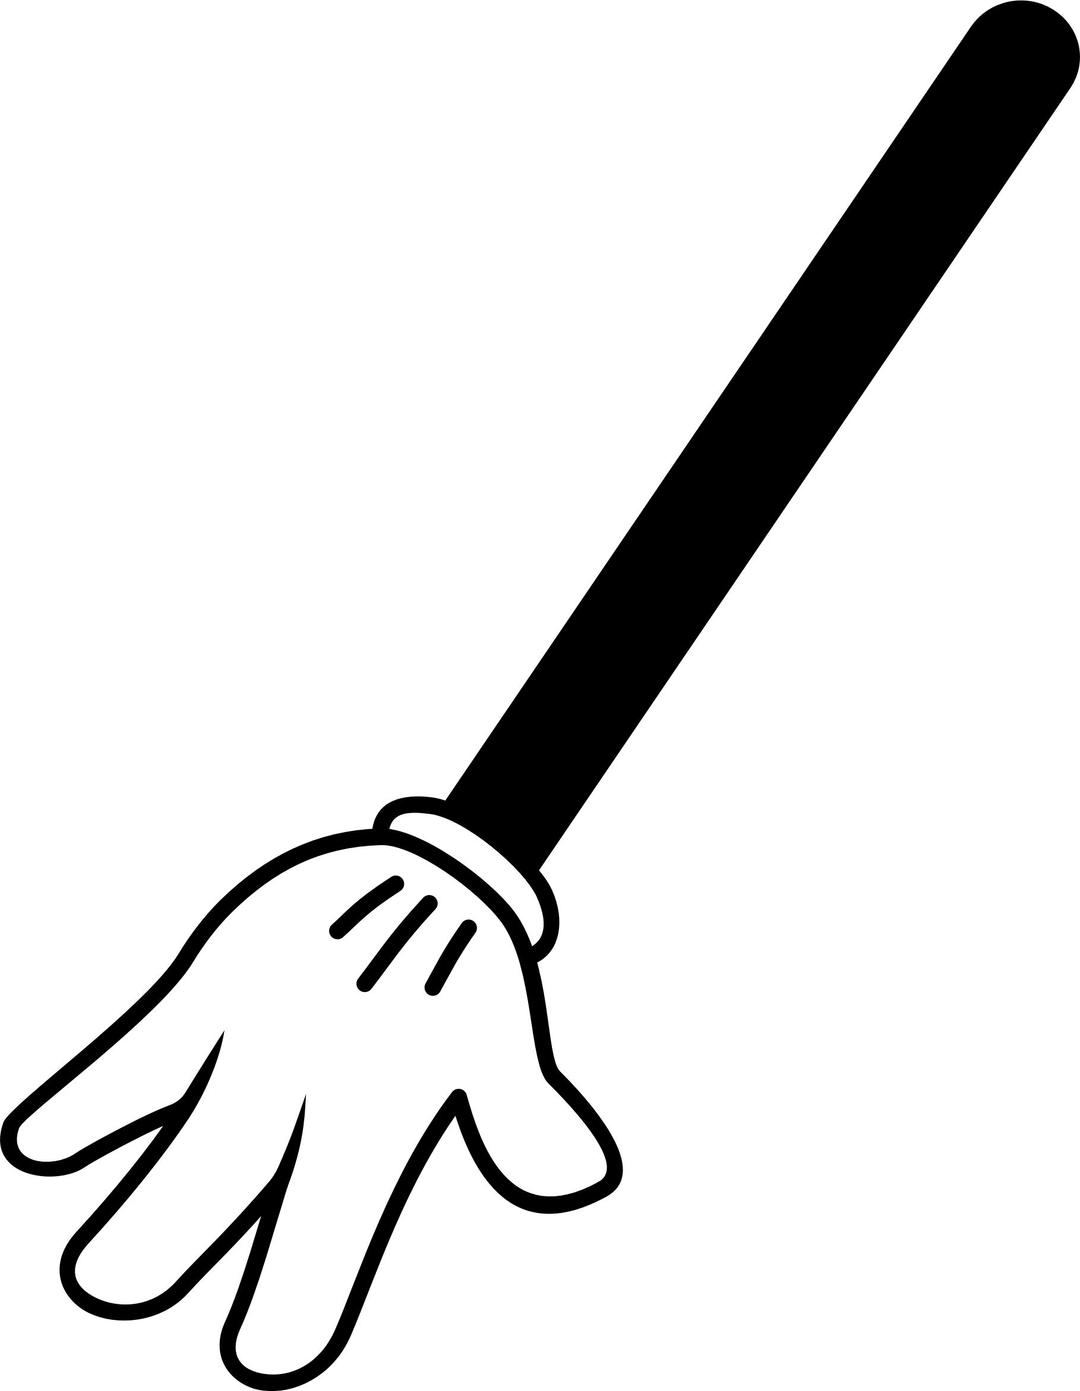 Right Arm png transparent